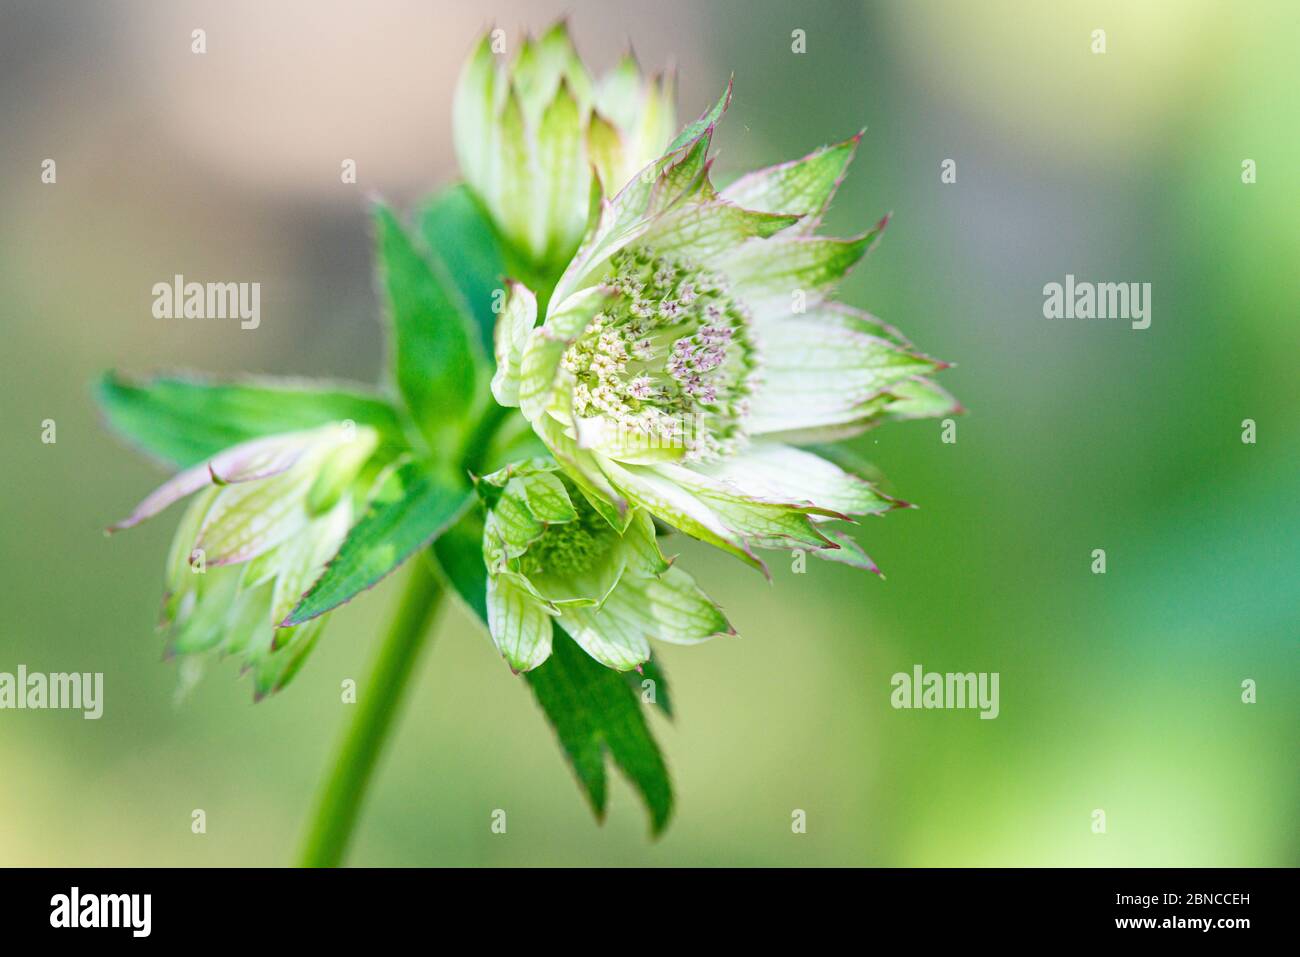 The flowers of a Astrantia Stock Photo